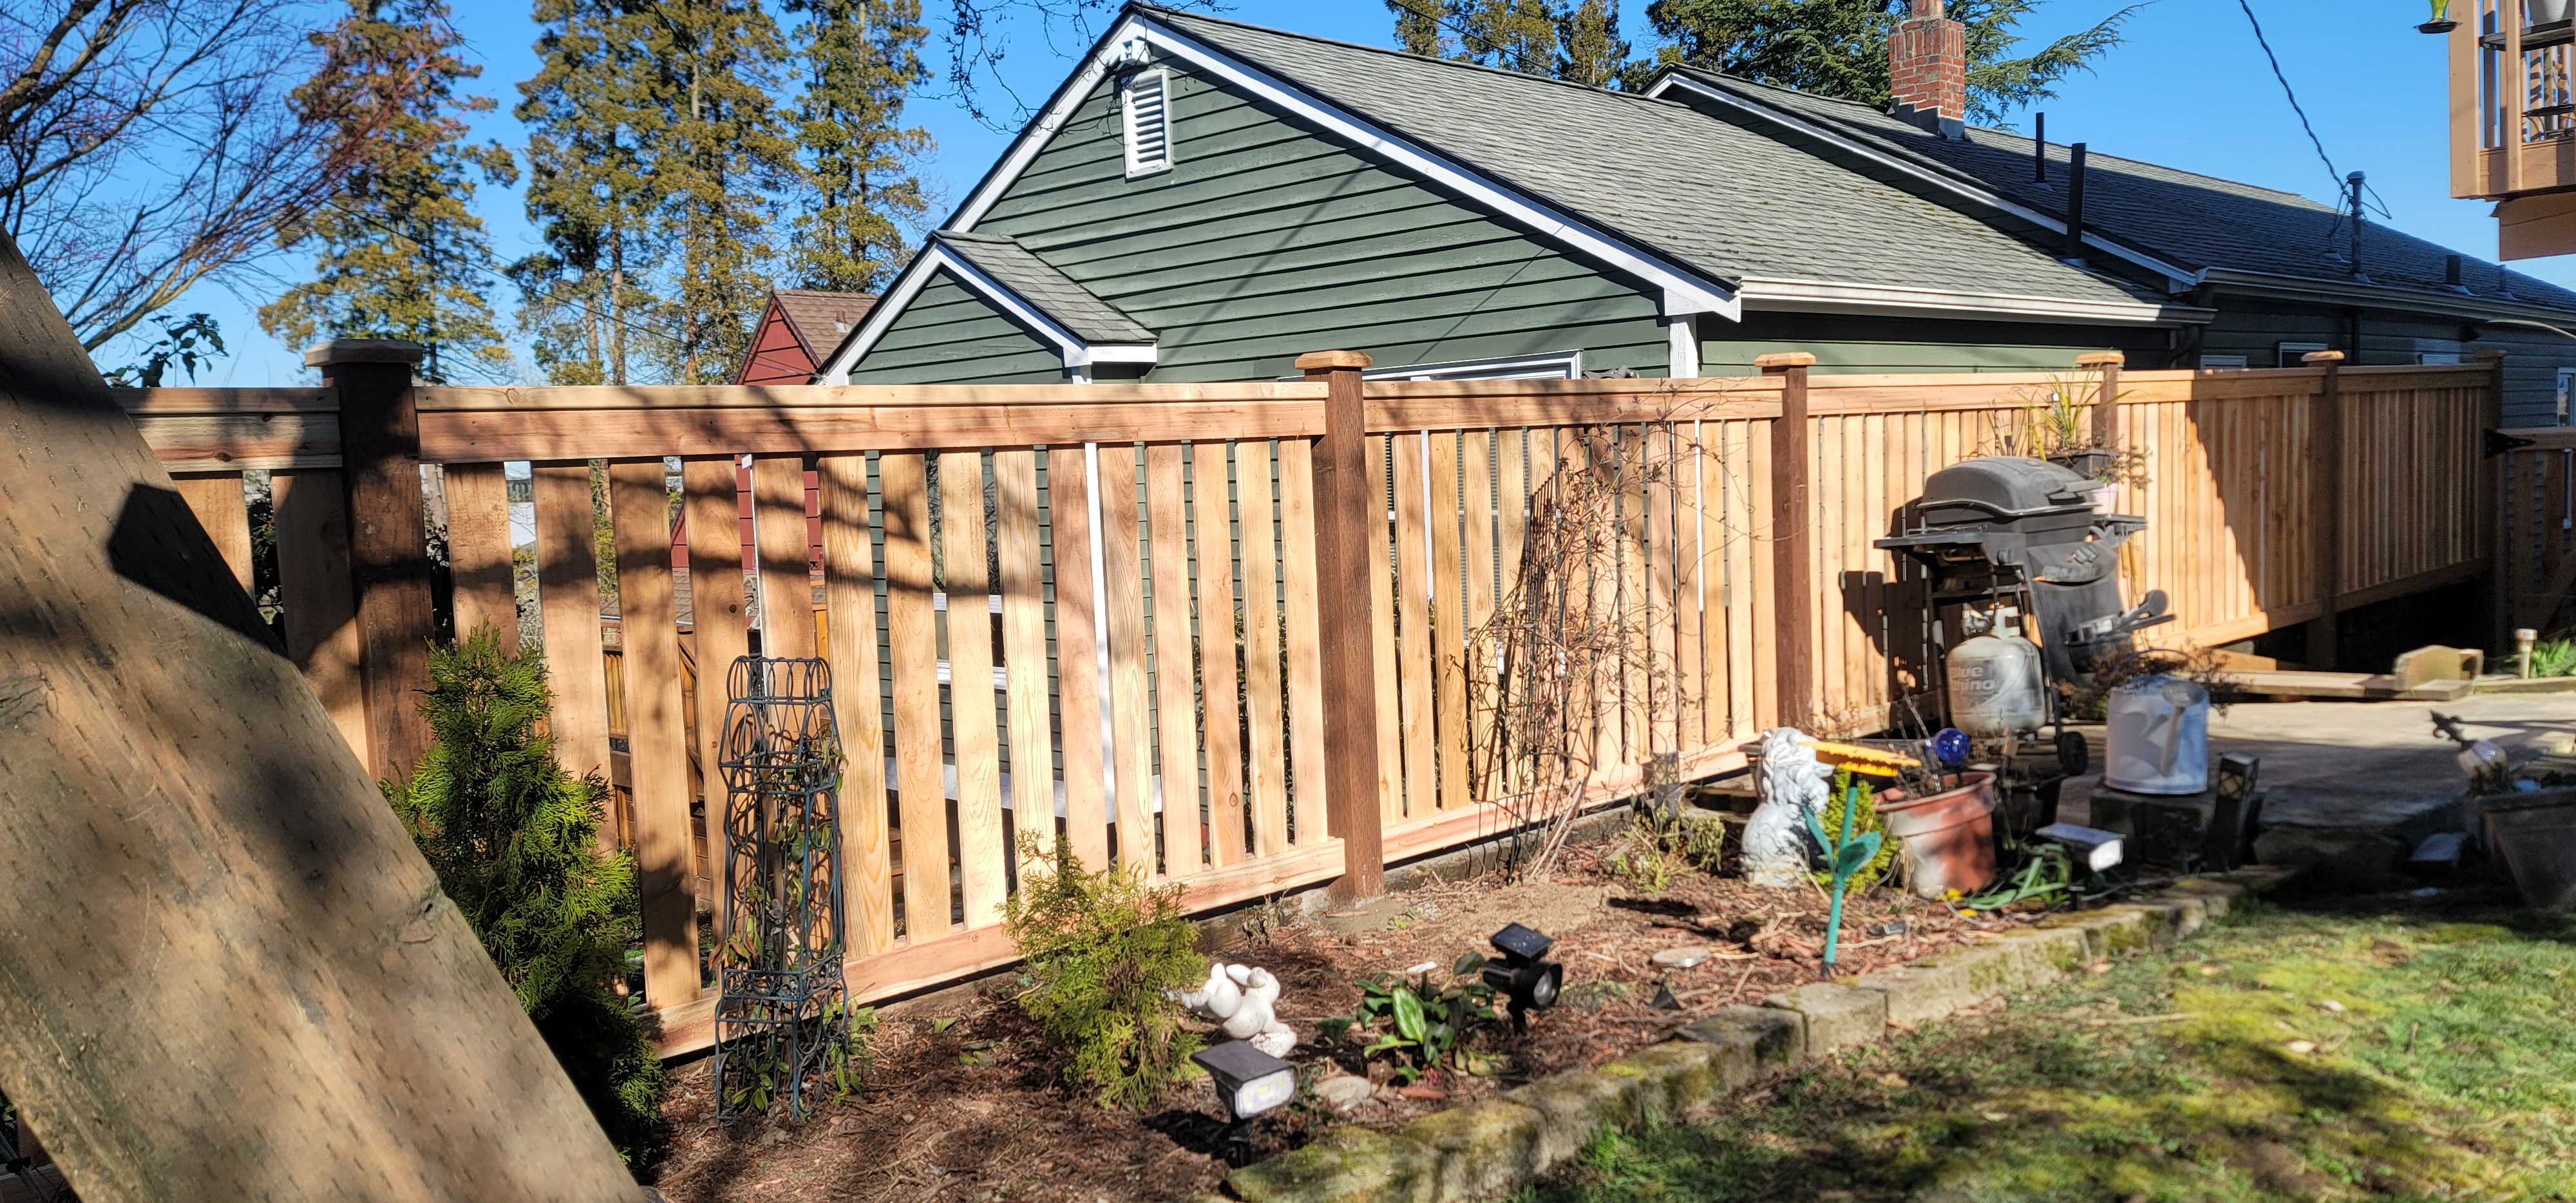 4'FT FULL PANEL CEDAR FENCE WITH SPACING.